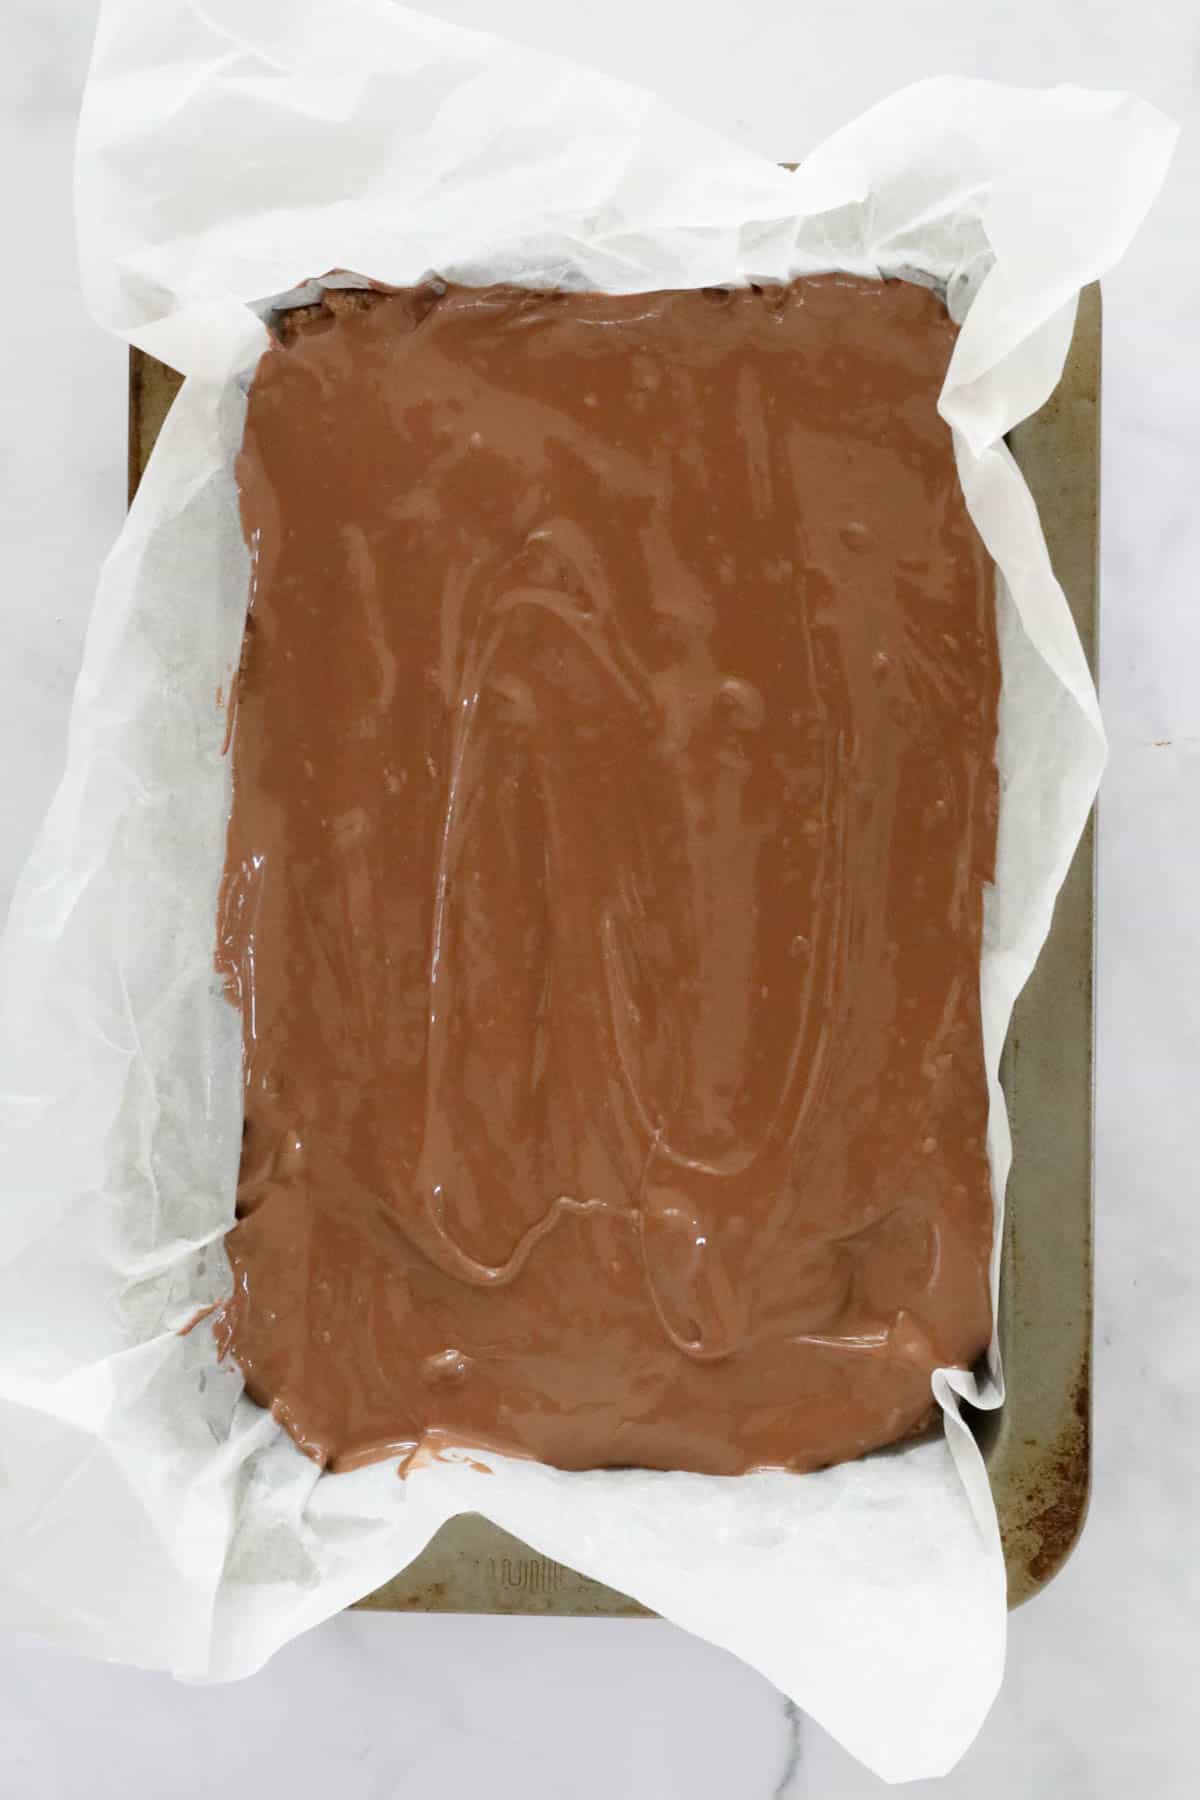 An overhead shot of chocolate topped slice.